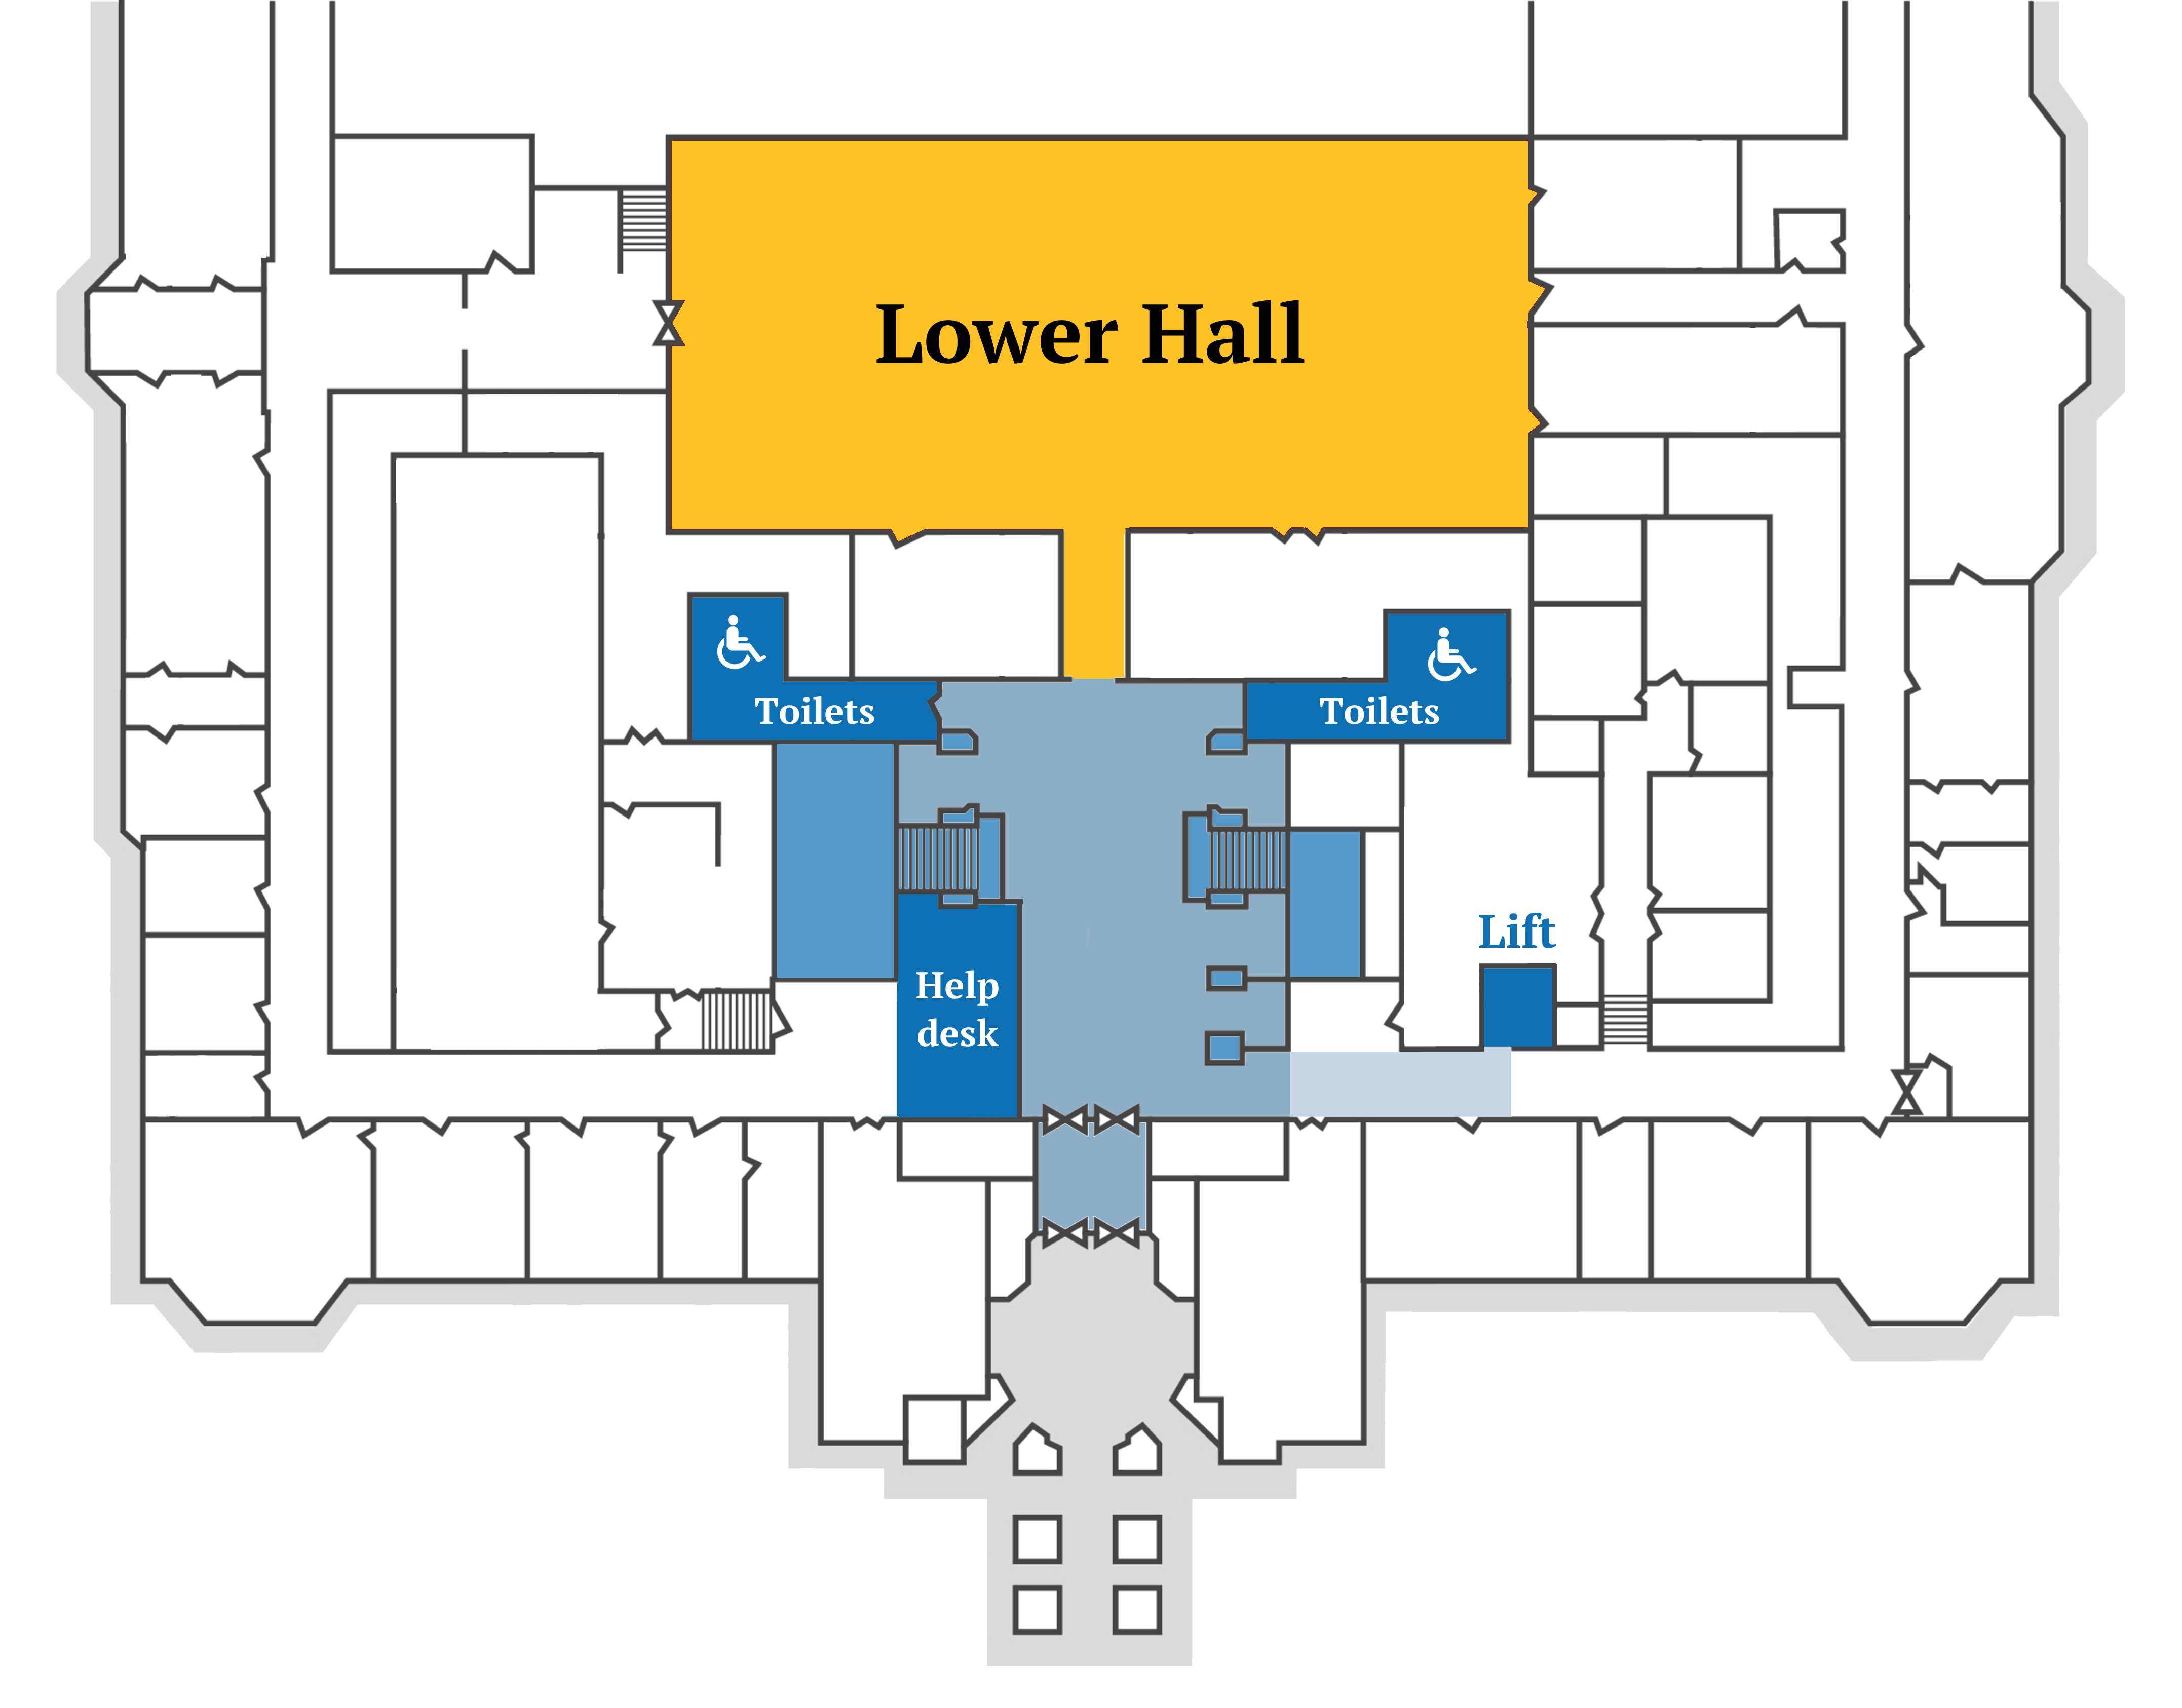 A labelled ground floor plan showing the locations of the lower hall, toilets, help desk and lifts.